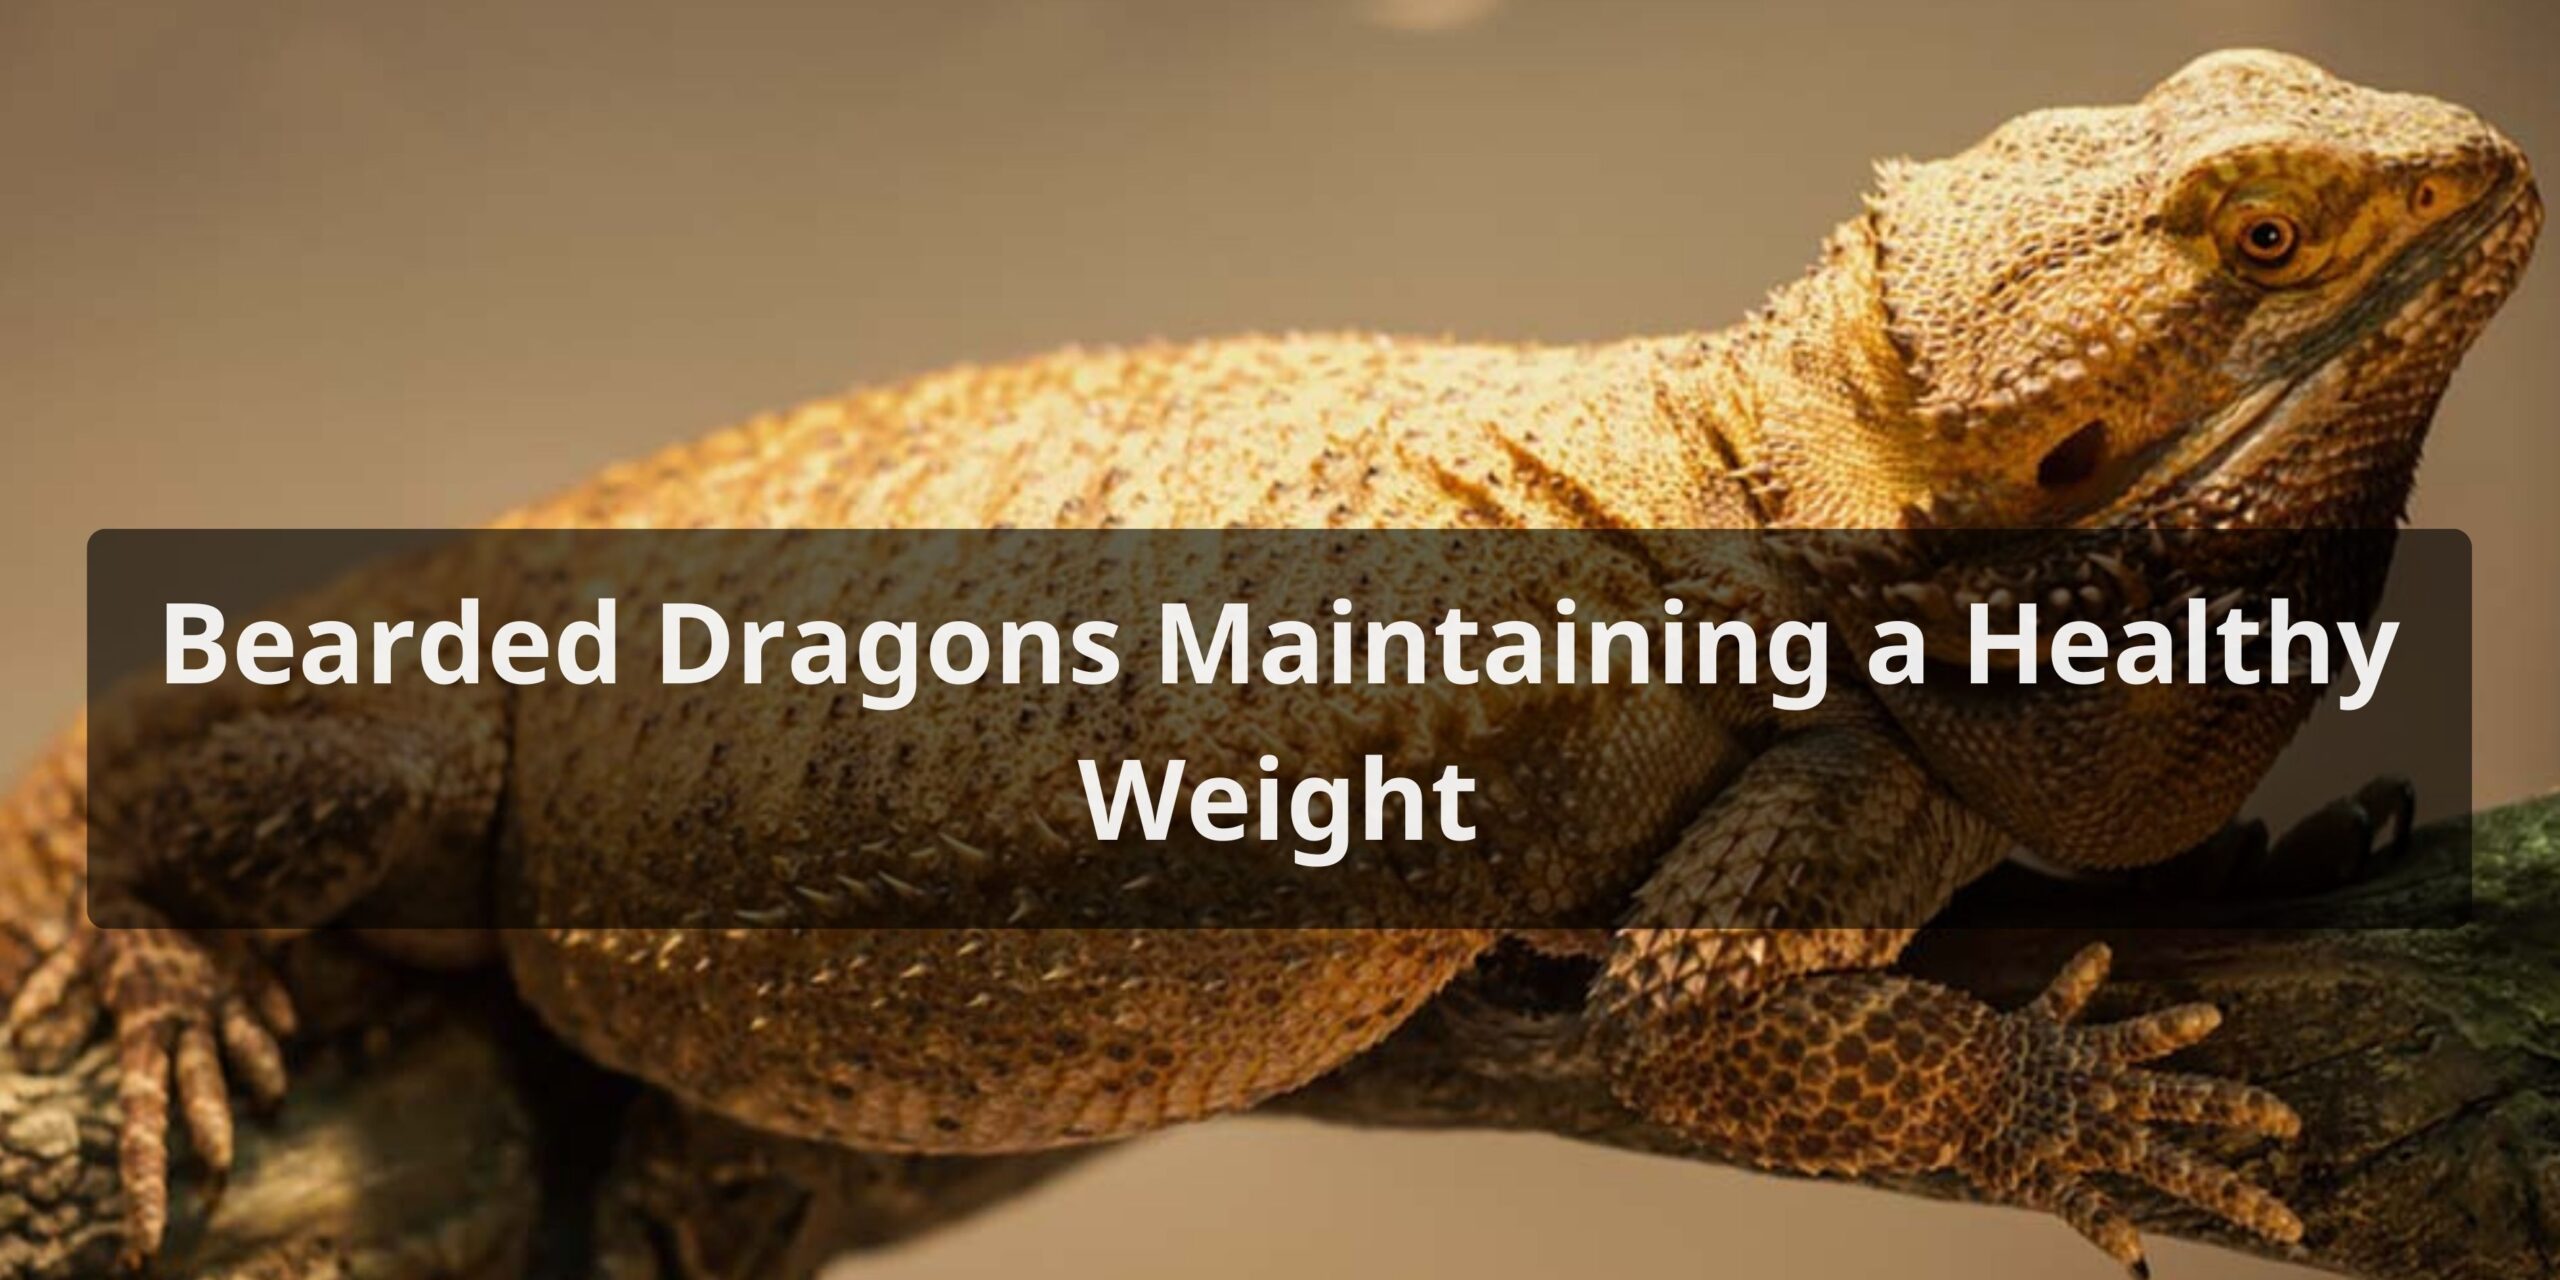 Bearded Dragons Maintaining a Healthy Weight